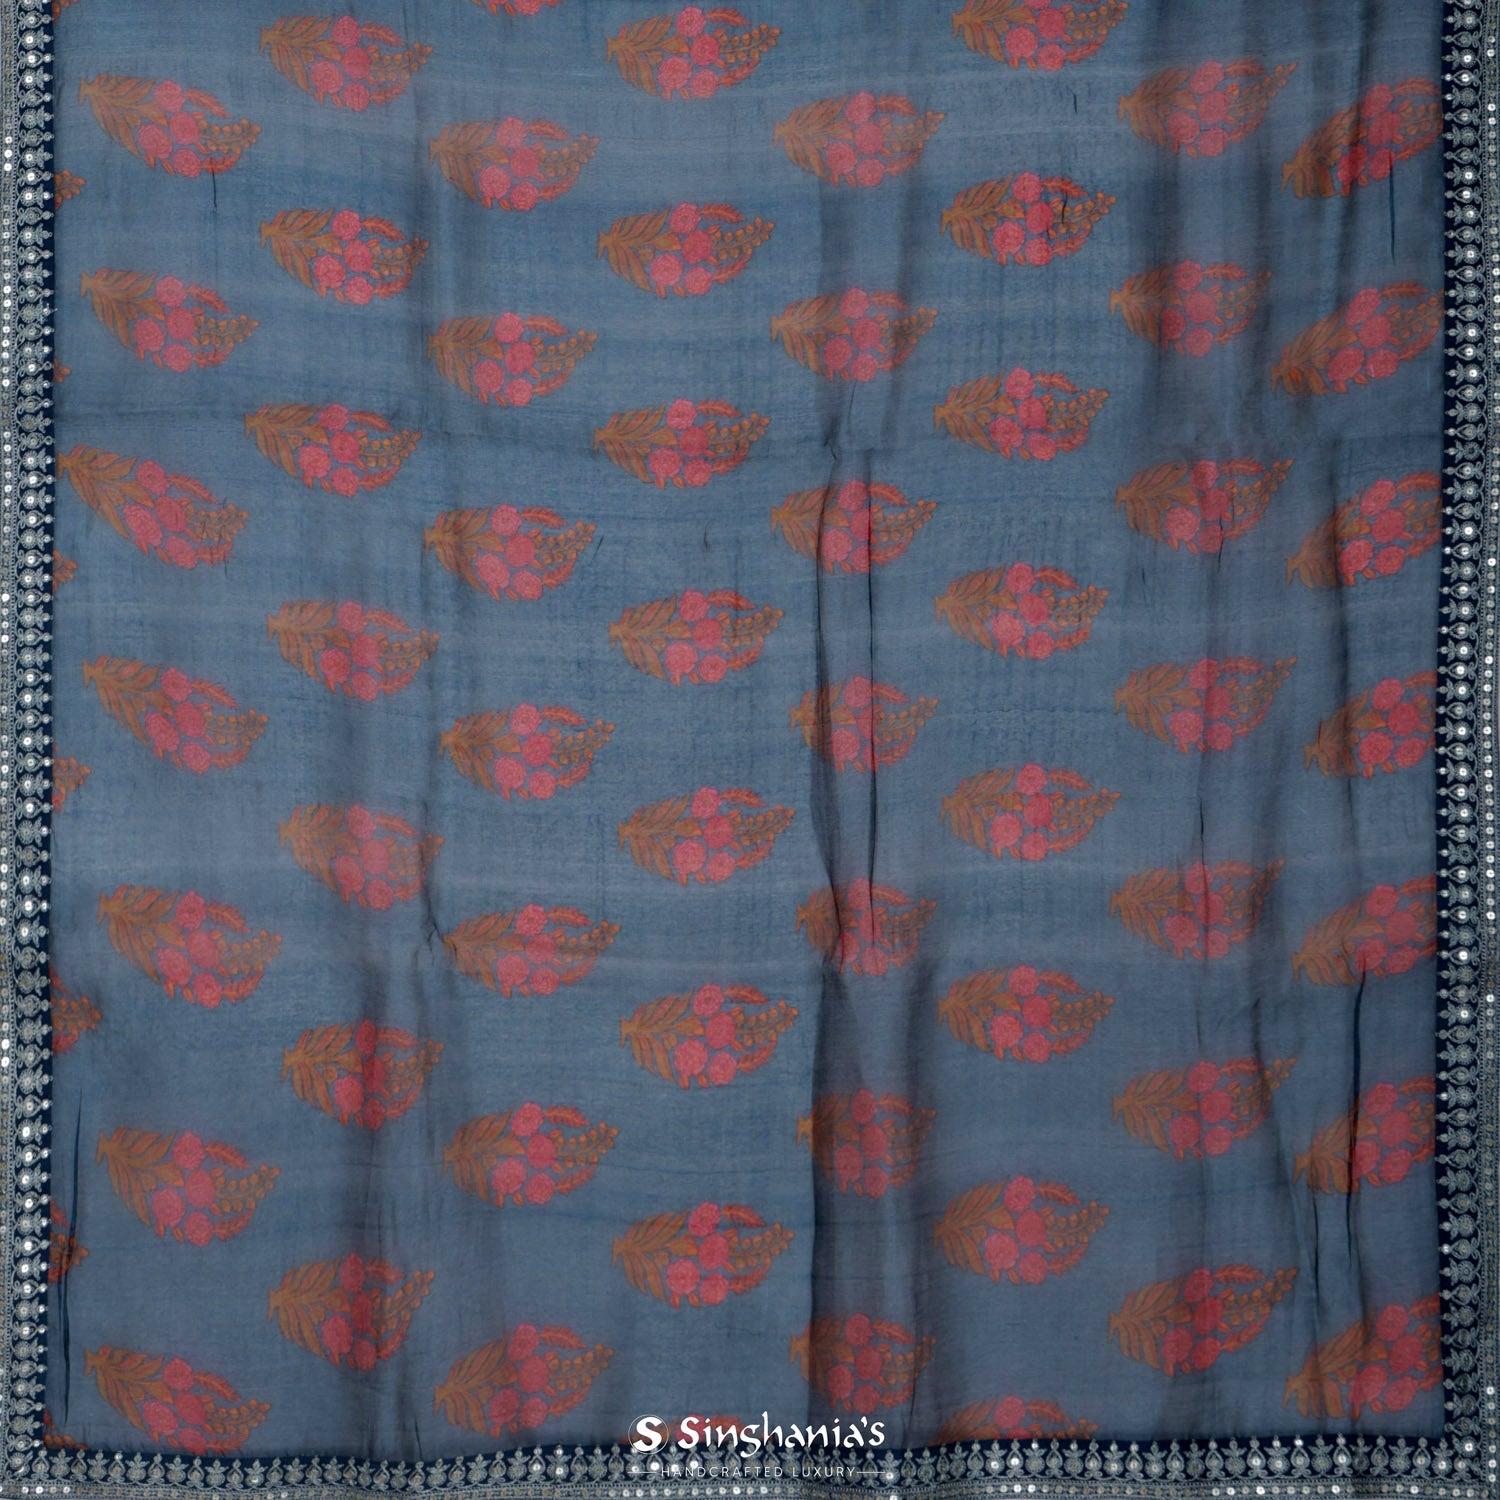 Aegean Blue Organza Tussar Saree With Printed Floral Pattern